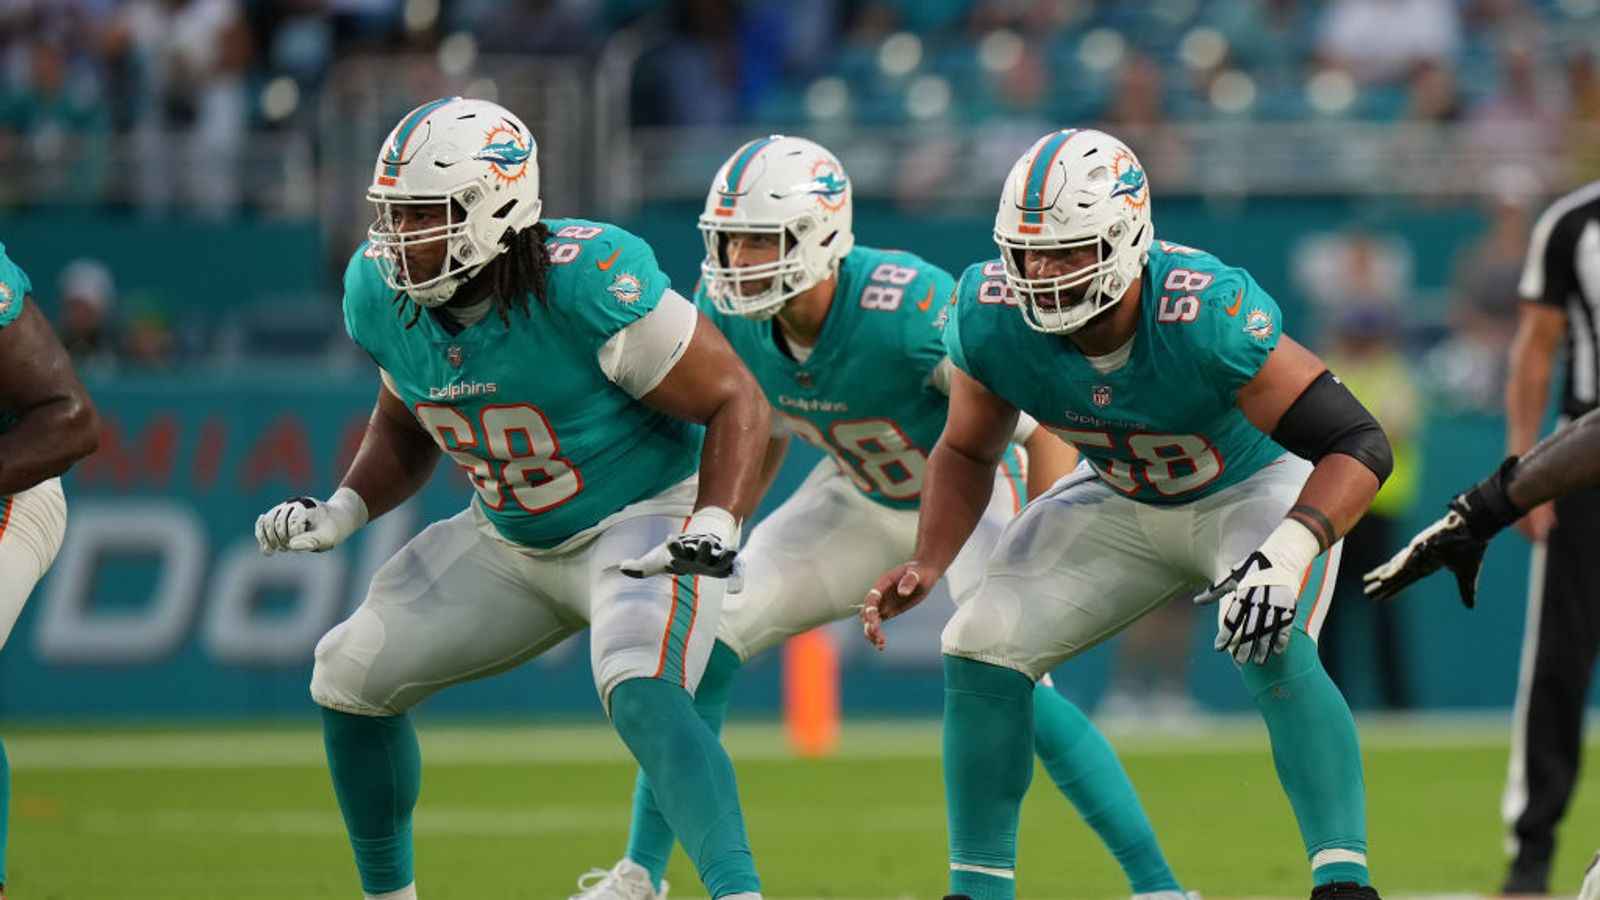 Dolphins' offense plays smart, small ball in win over Patriots